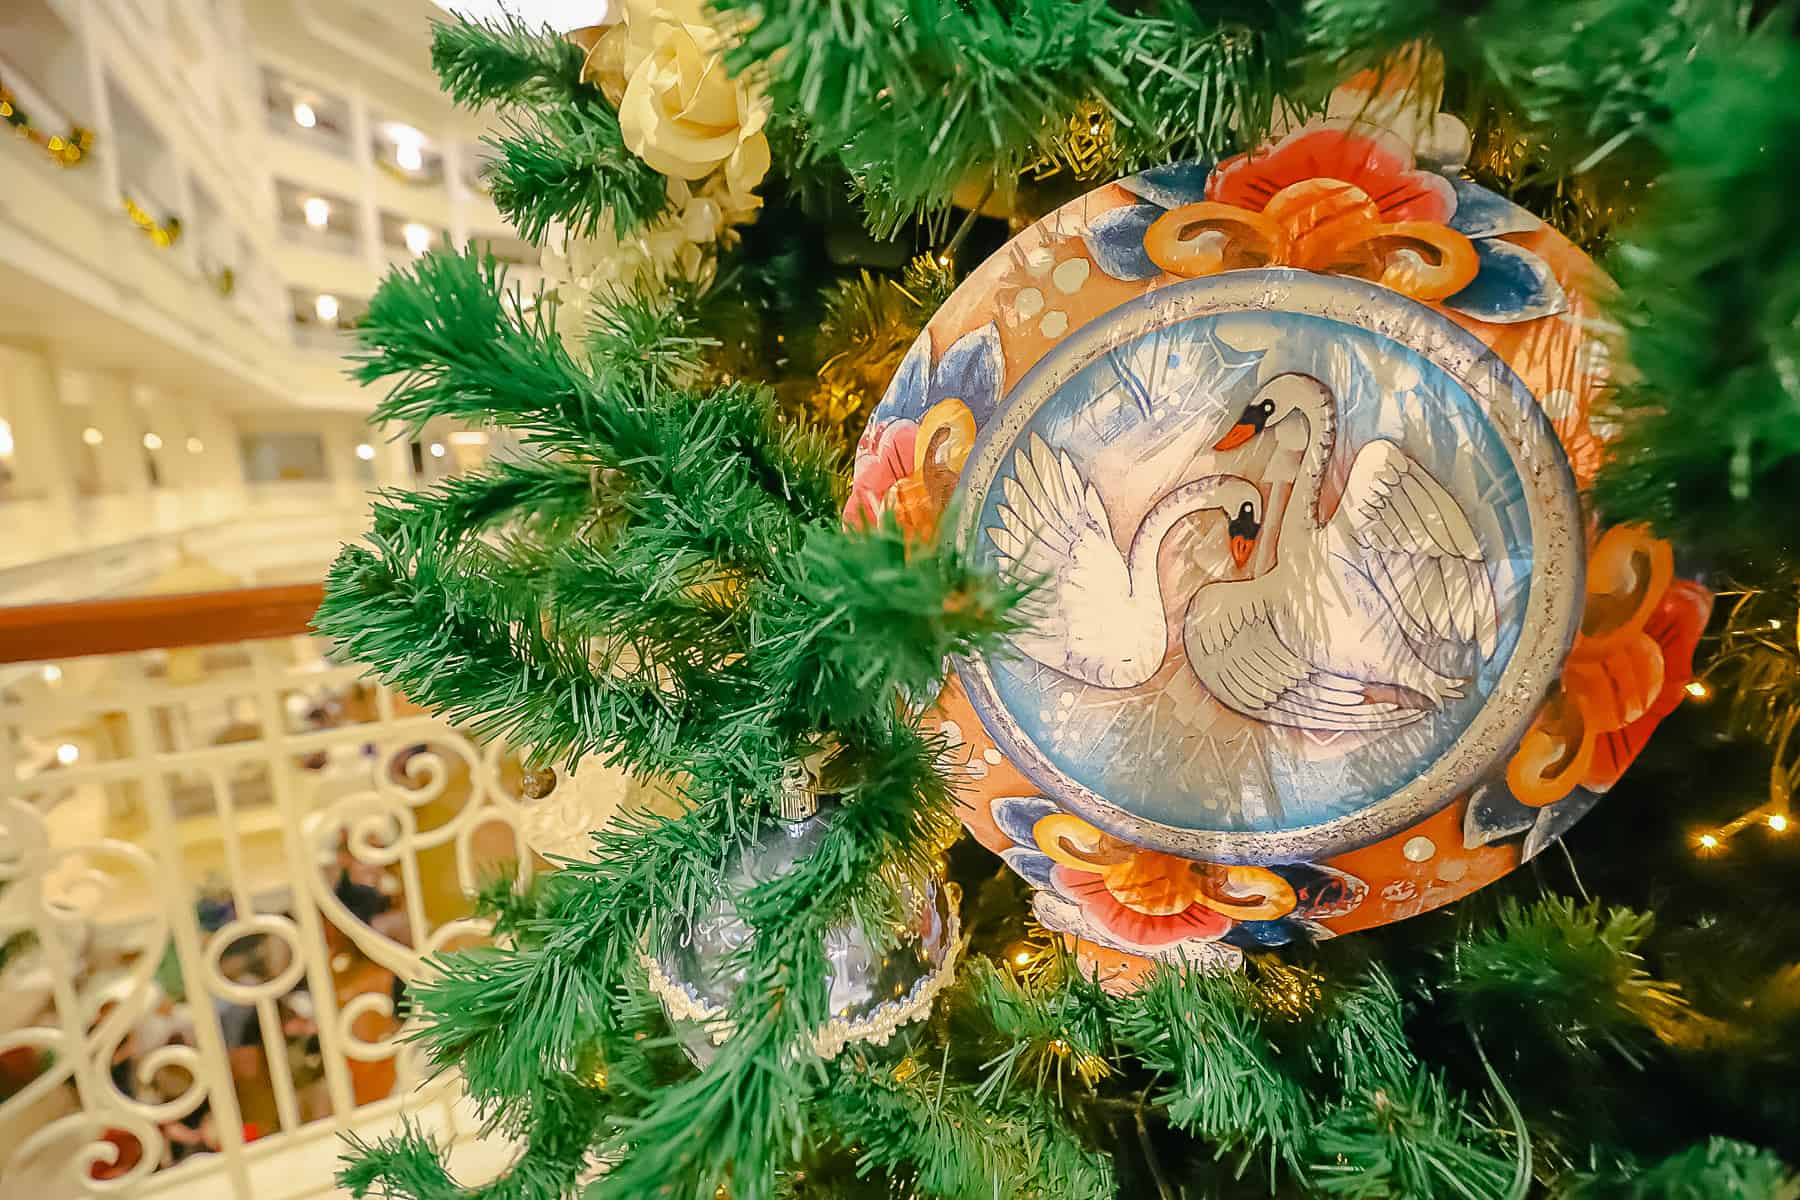 A medallion ornament with a pair of swans. One appears to be sheltering the other.